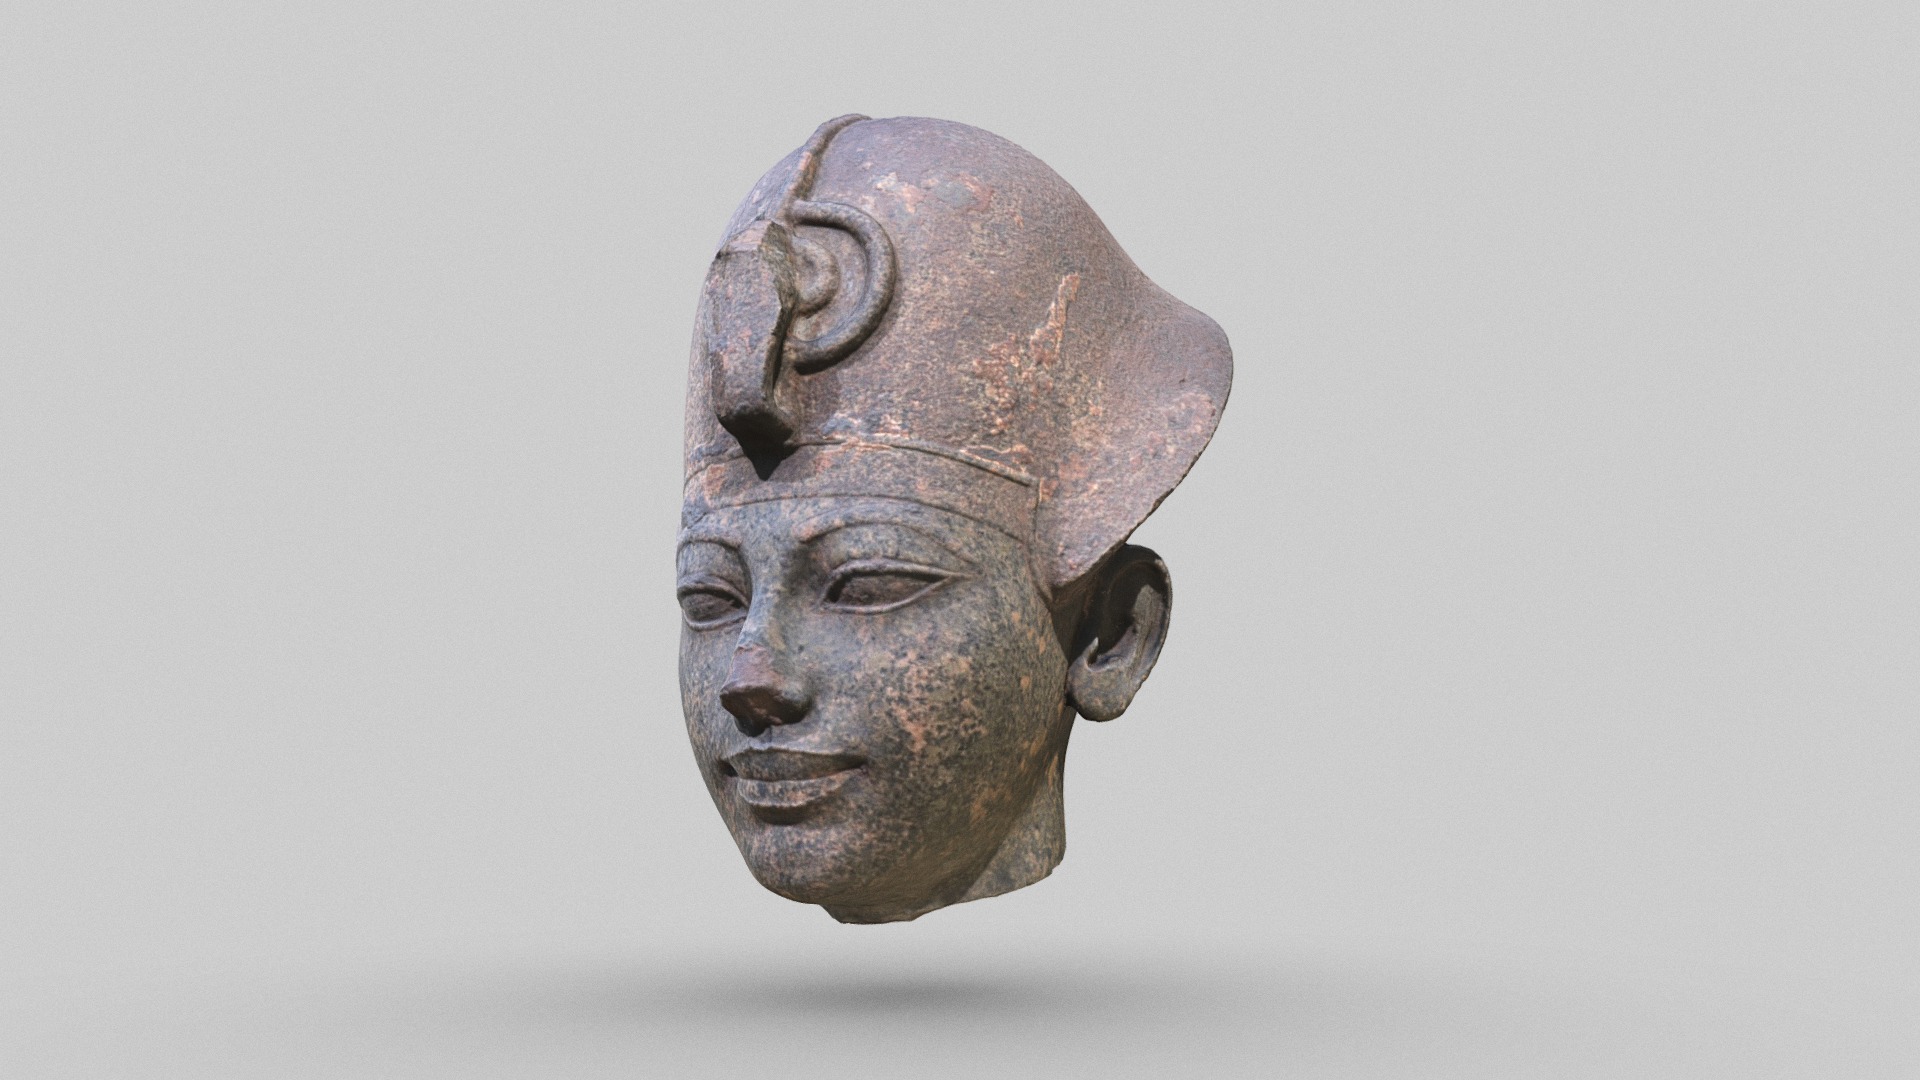 3D model Head of Amenhotep III, c. 1391-1353 BC - This is a 3D model of the Head of Amenhotep III, c. 1391-1353 BC. The 3D model is about a clay head of a man.